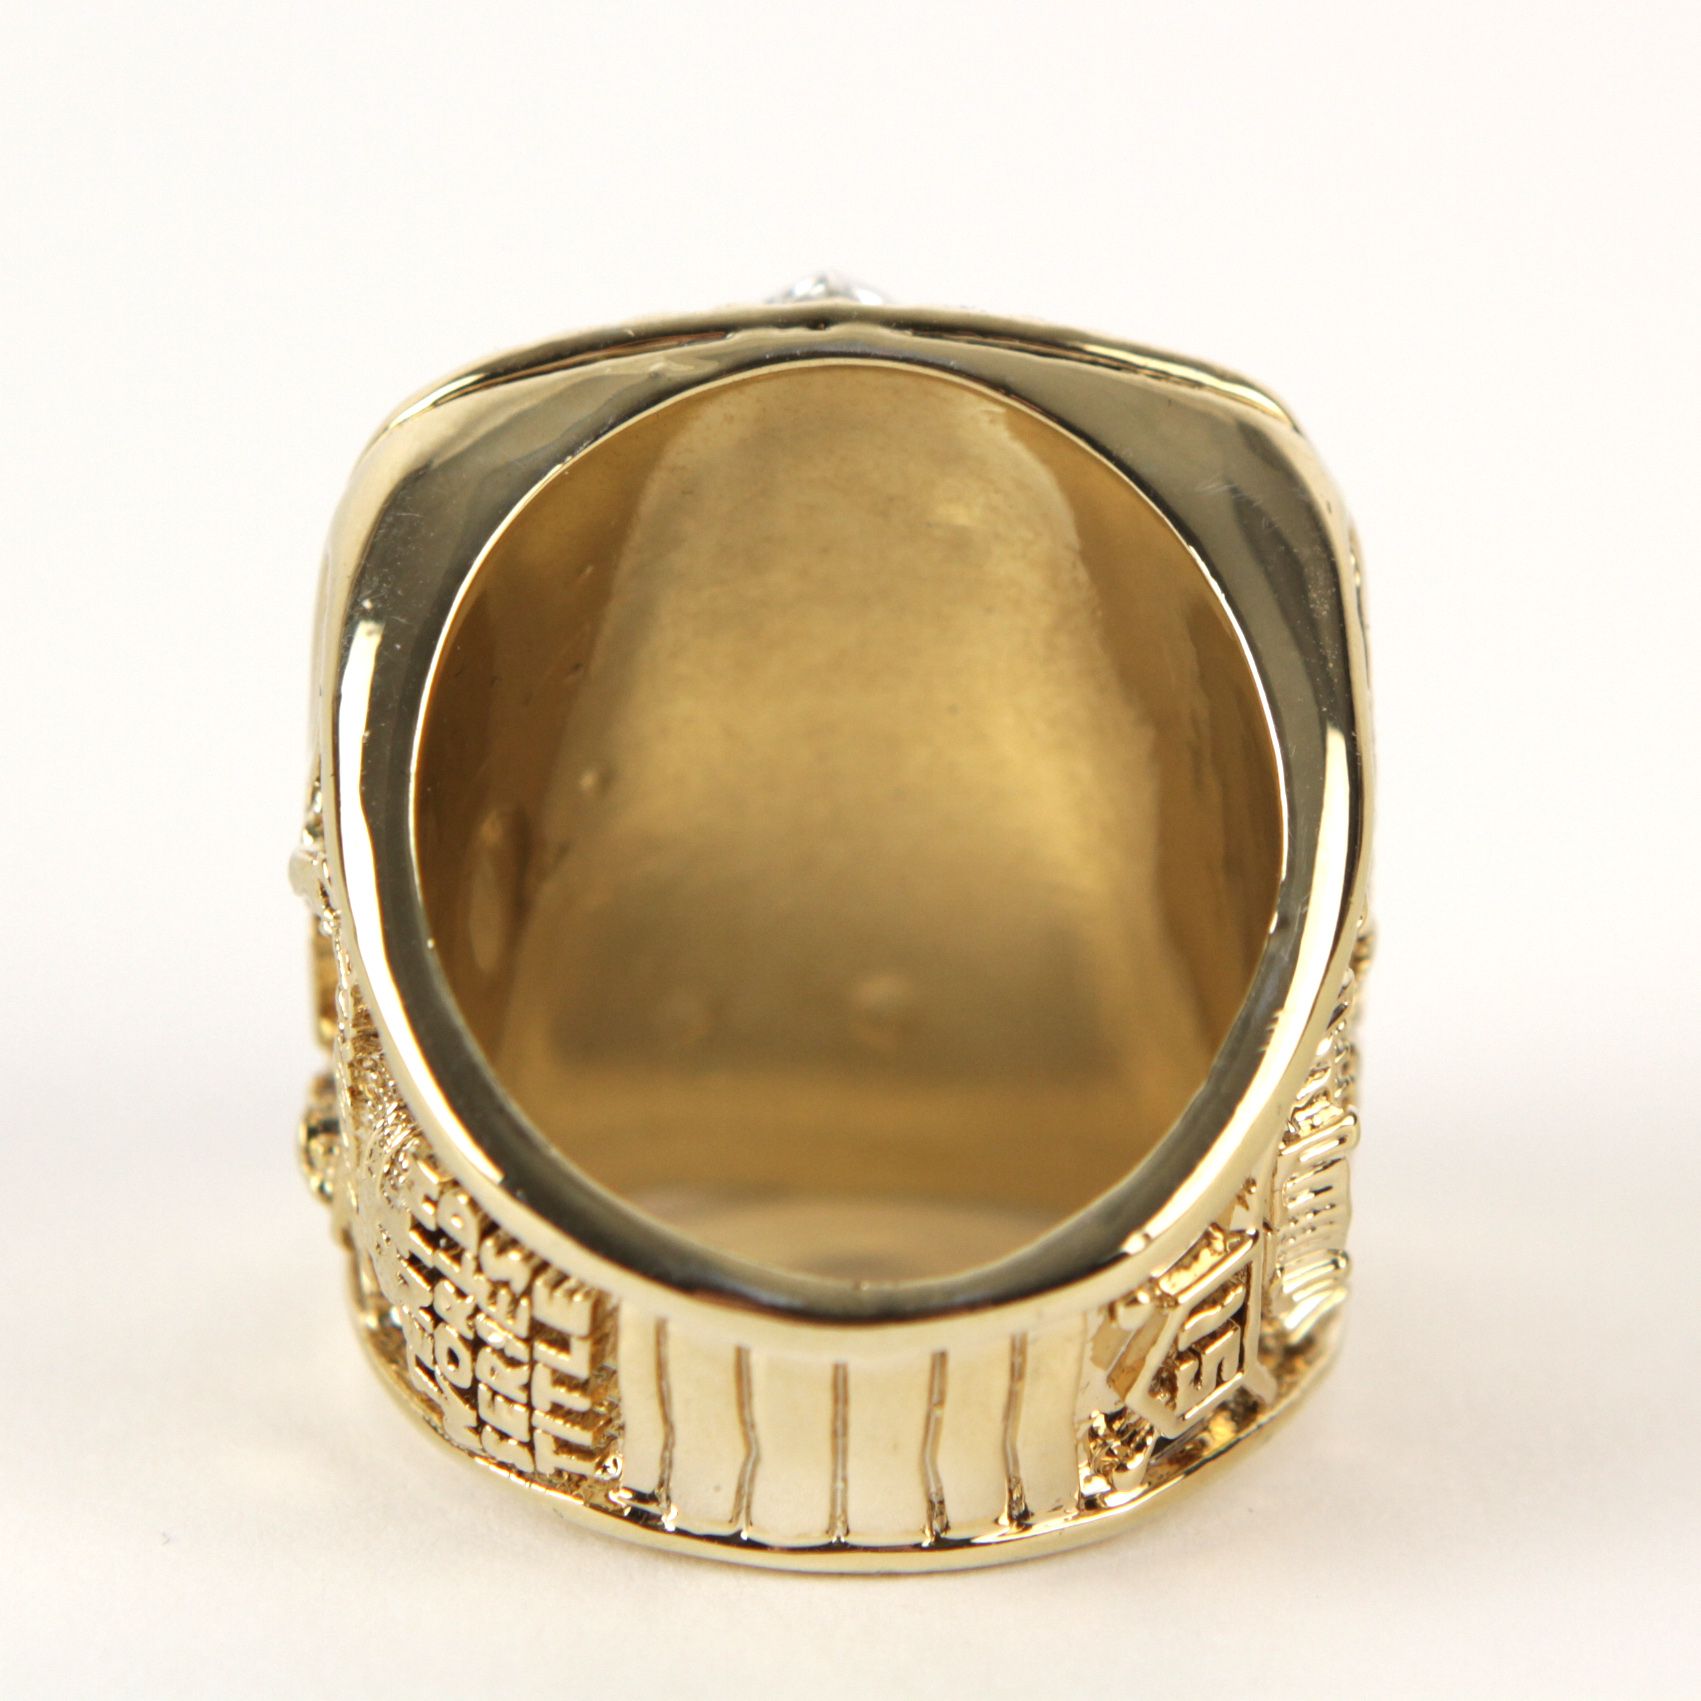 St Louis Cardinals '82 World Series Mystery Replica Ring